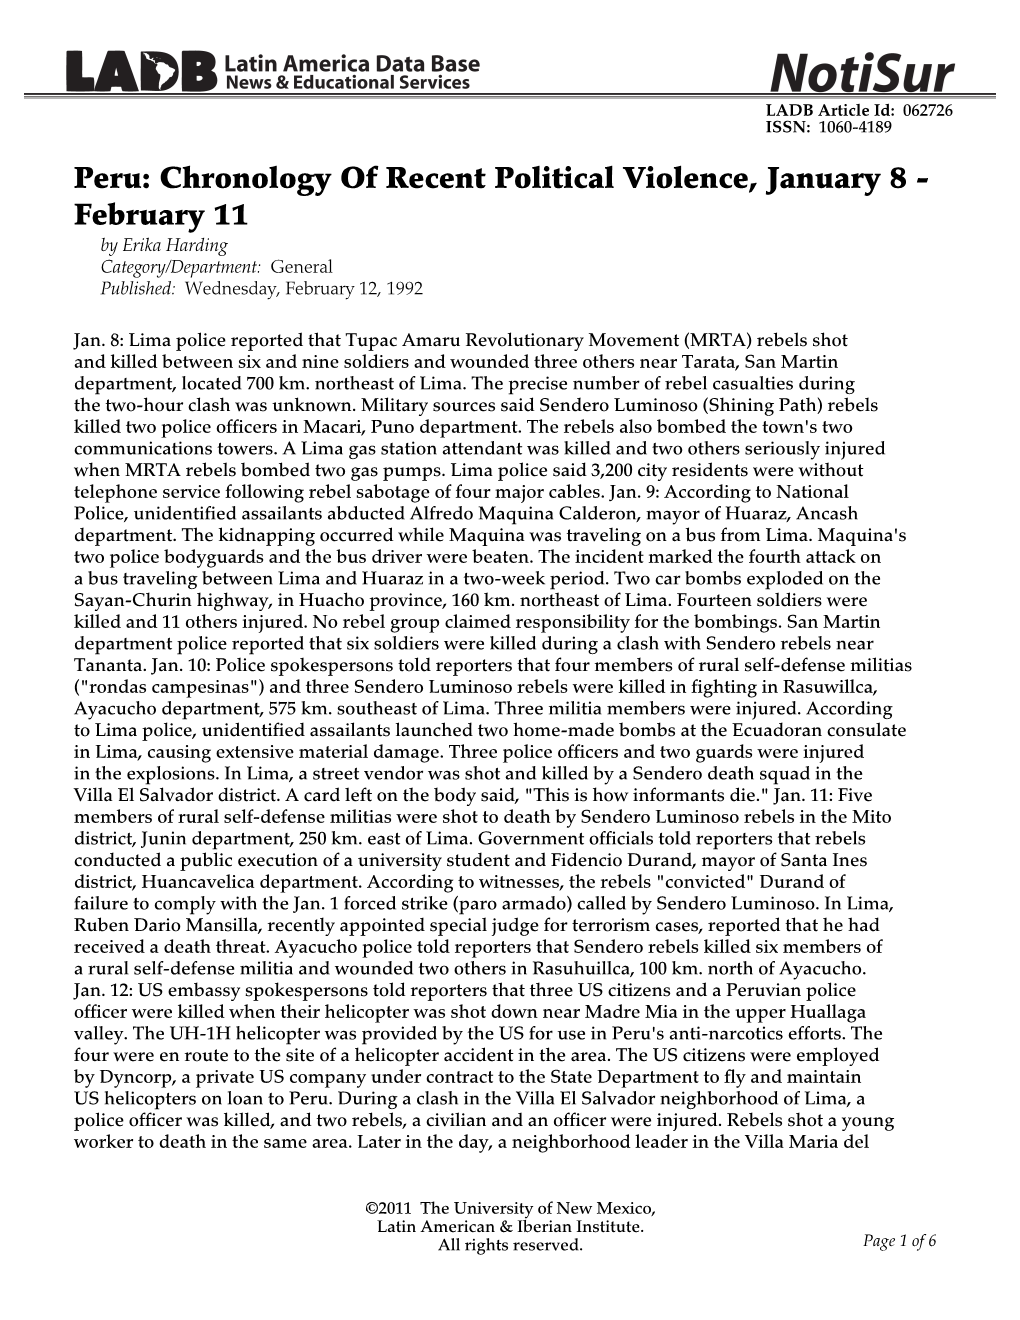 Peru: Chronology of Recent Political Violence, January 8 - February 11 by Erika Harding Category/Department: General Published: Wednesday, February 12, 1992